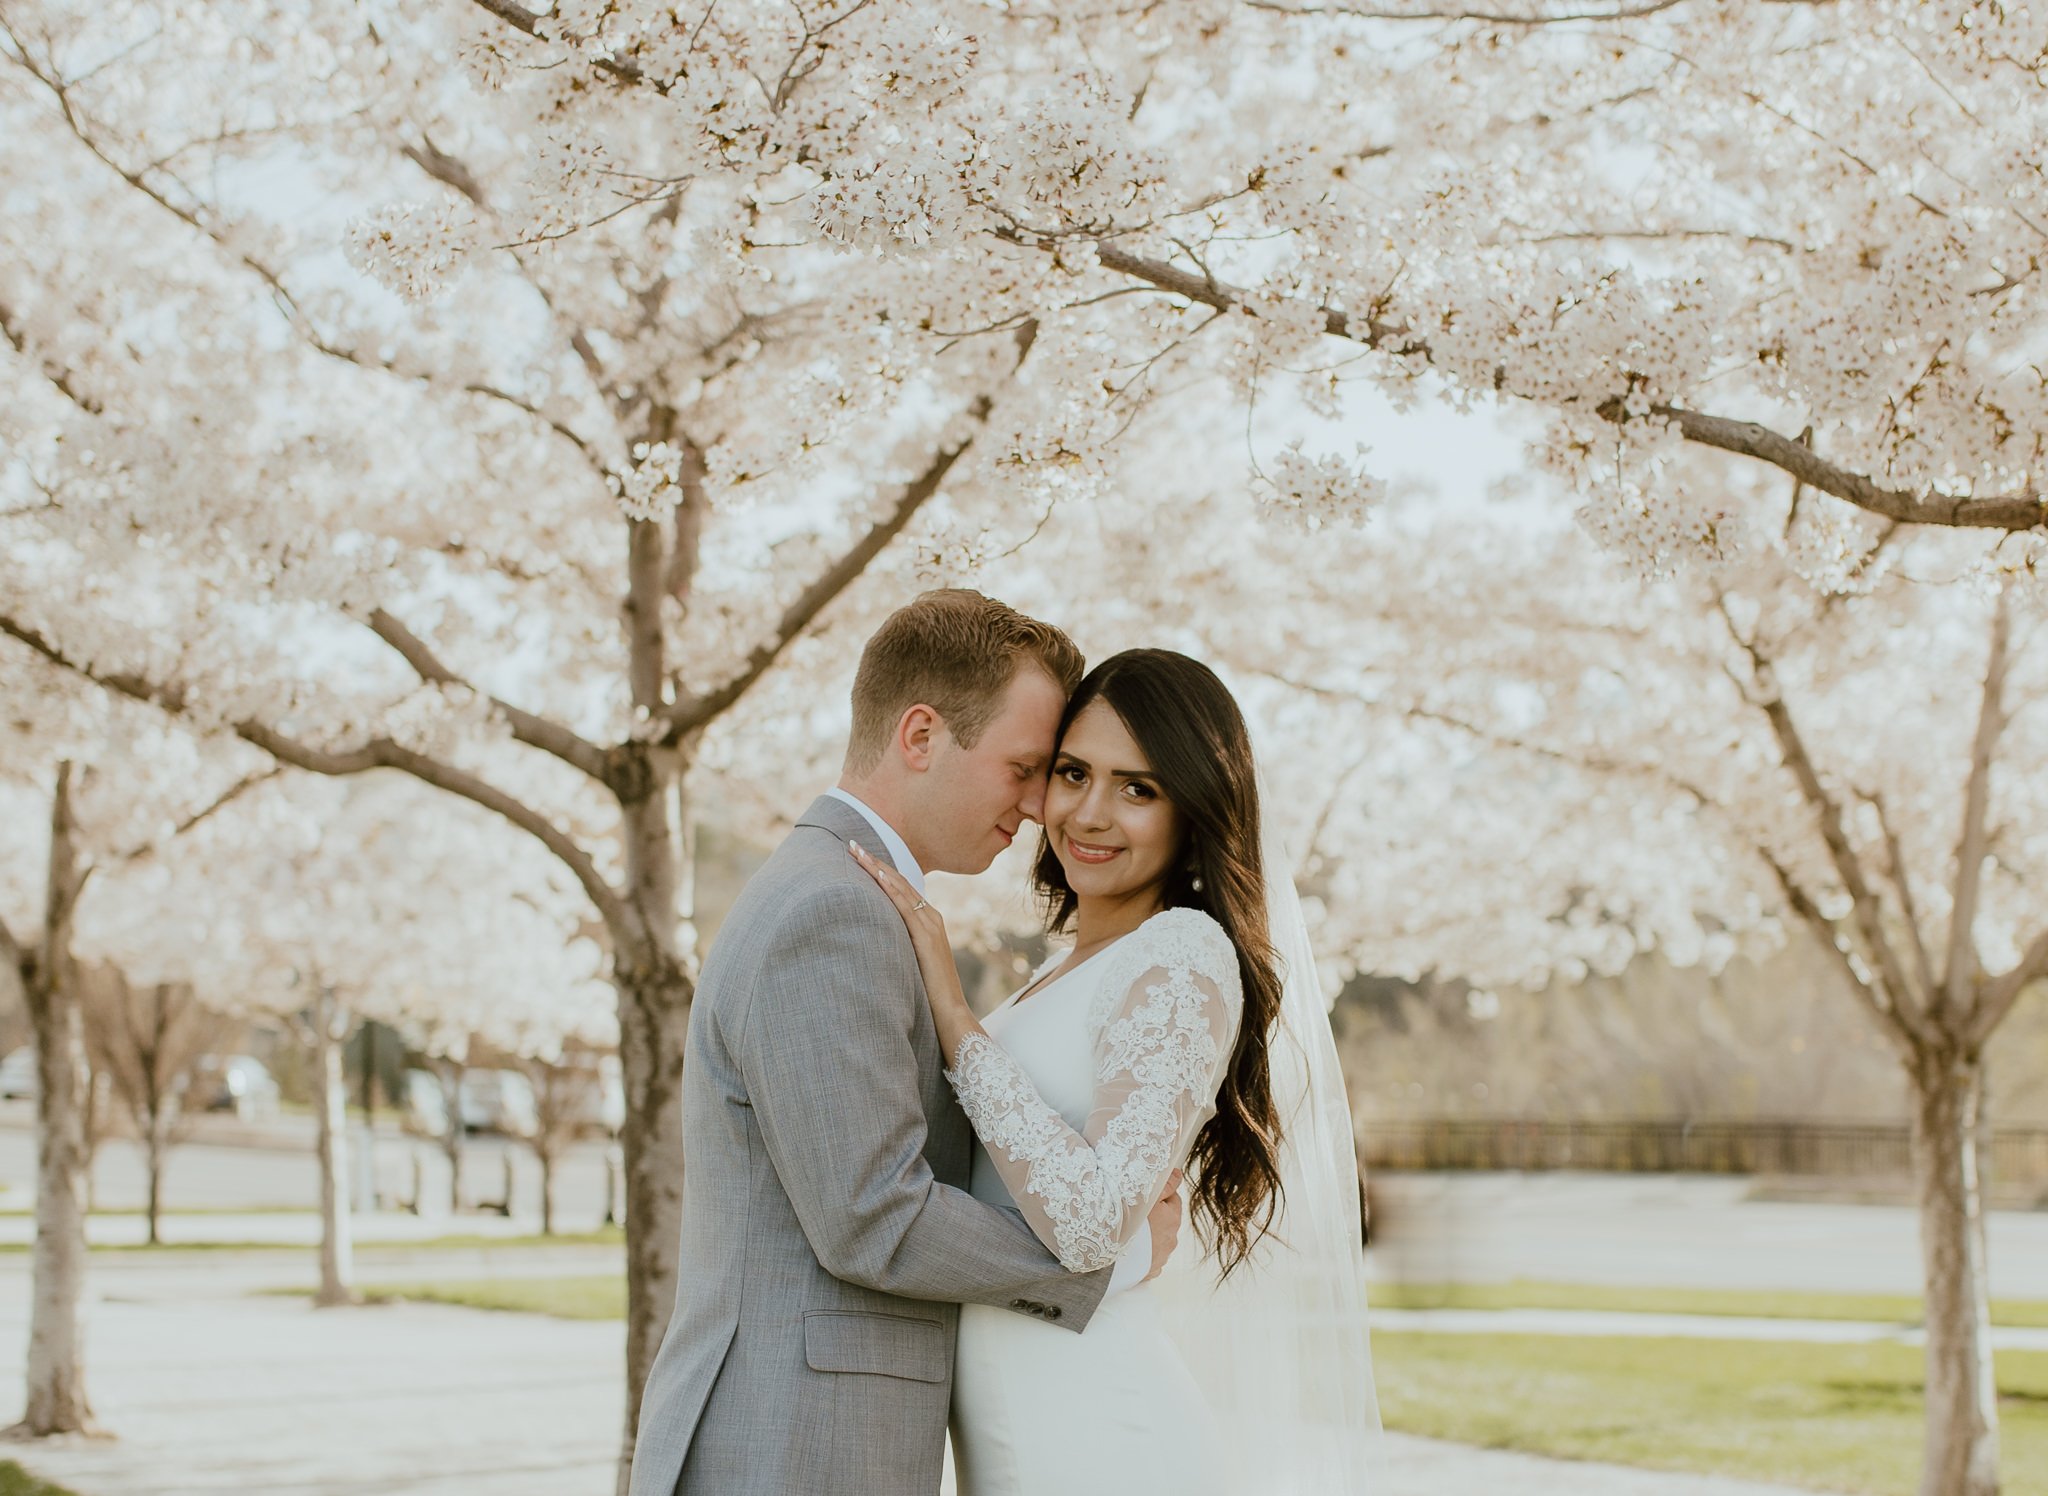 Utah-State-Capitol-Spring-Blossons-Bountiful-LDS-Wedding-Hopesandcheers-photo-4